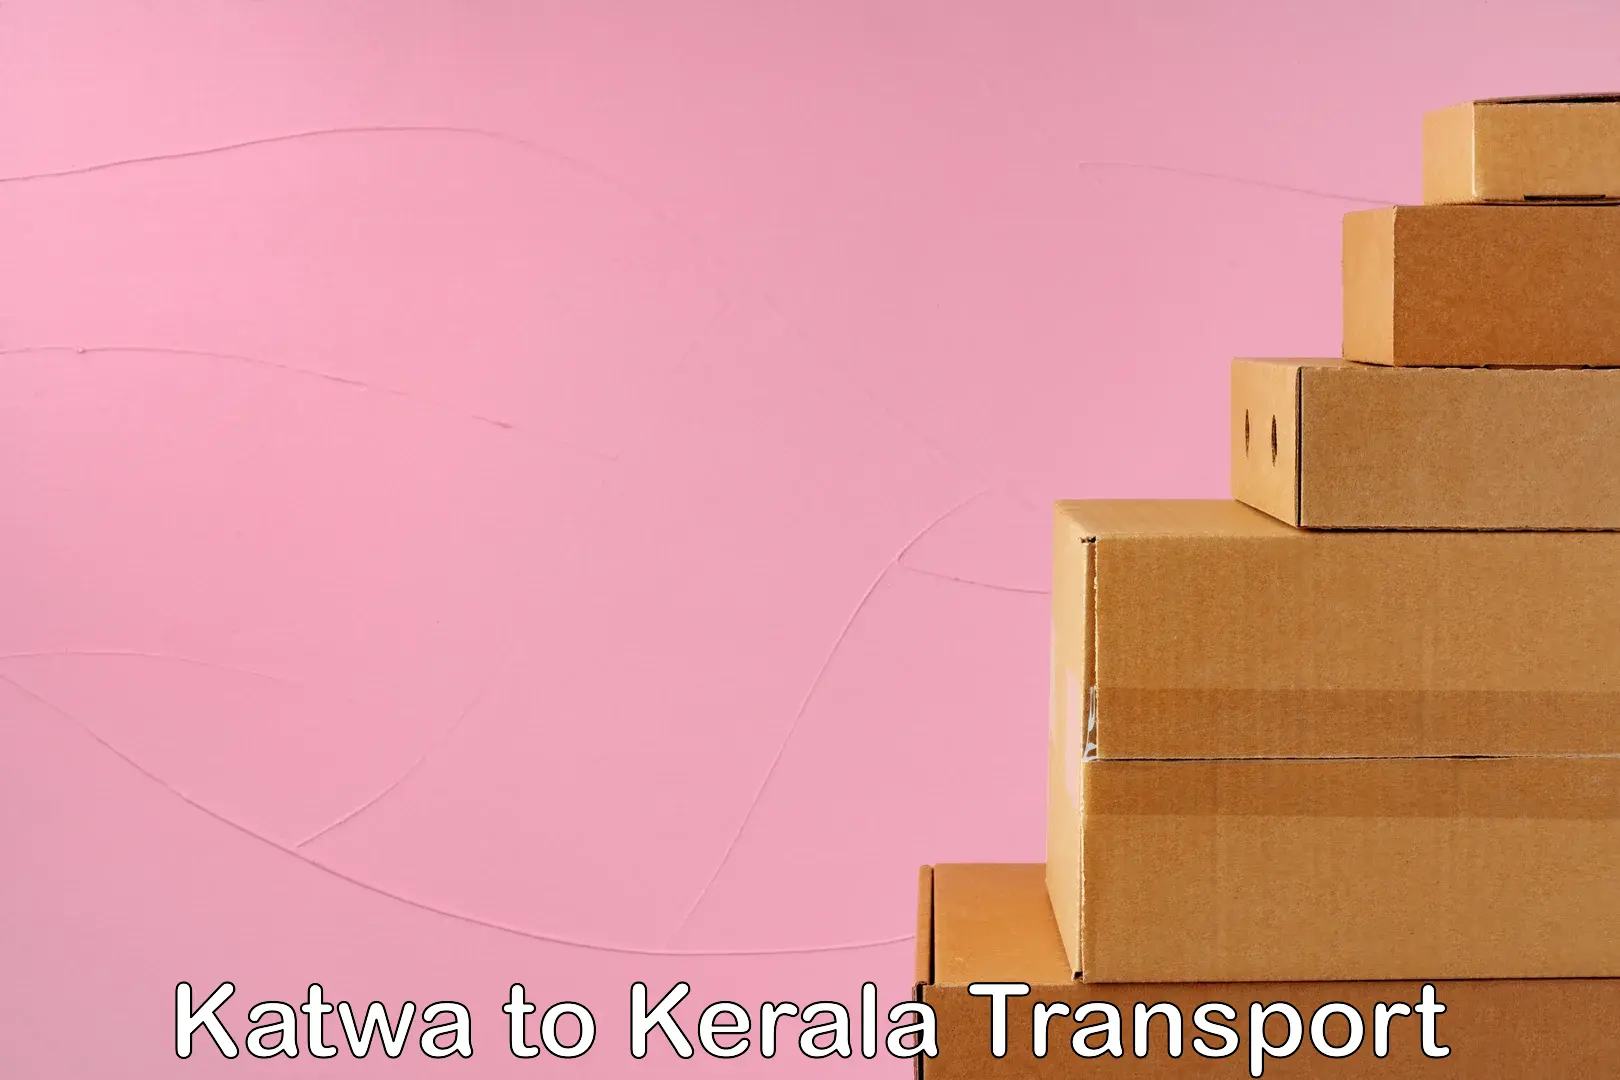 Domestic goods transportation services in Katwa to Malappuram